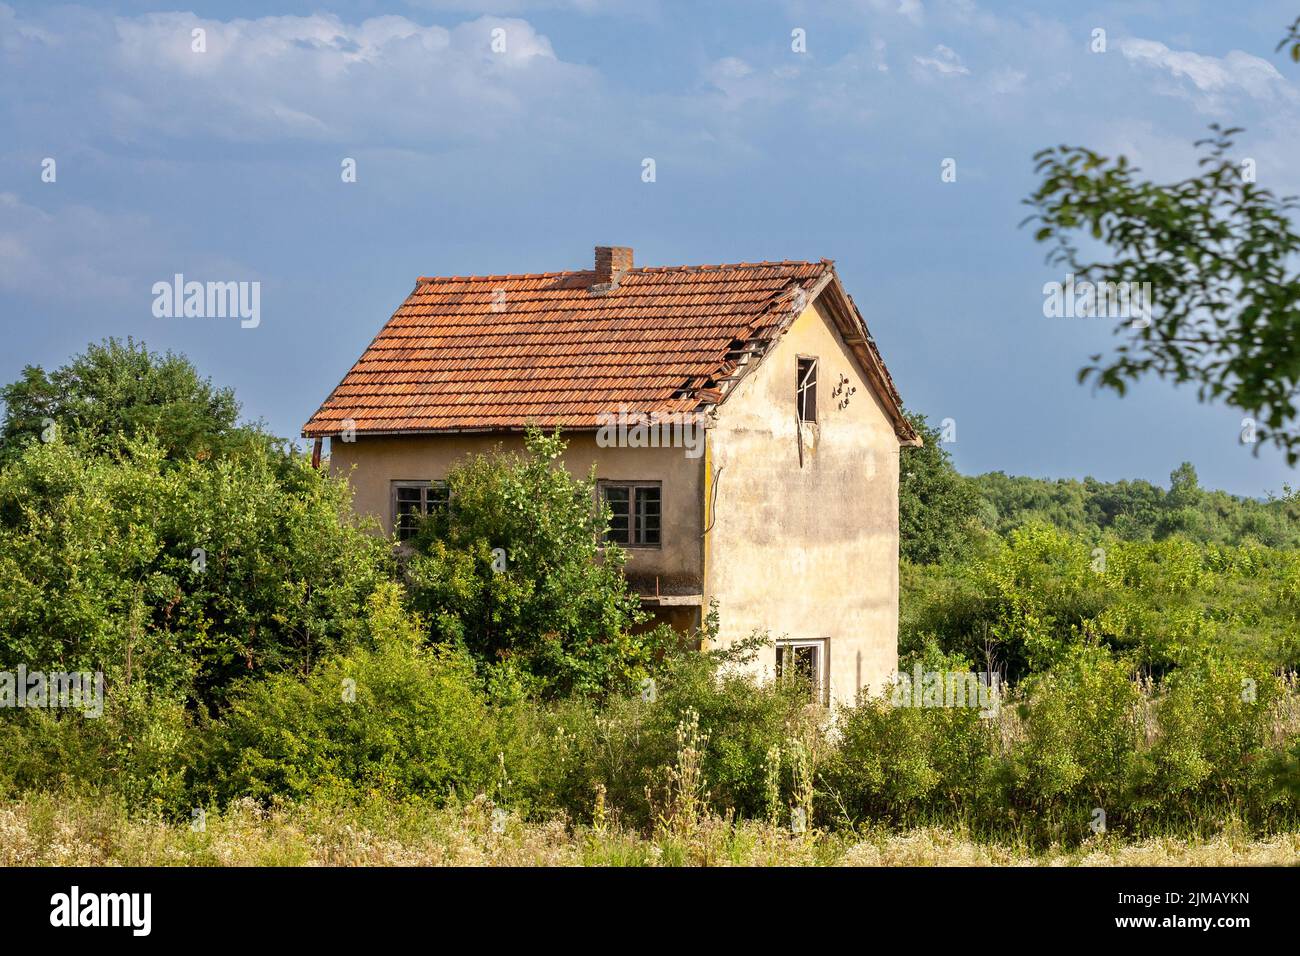 Picture of an abandoned farm in Serbia, with the facade of its main house heavily damaged in a region hit with demographic decline and rural exodus. Stock Photo